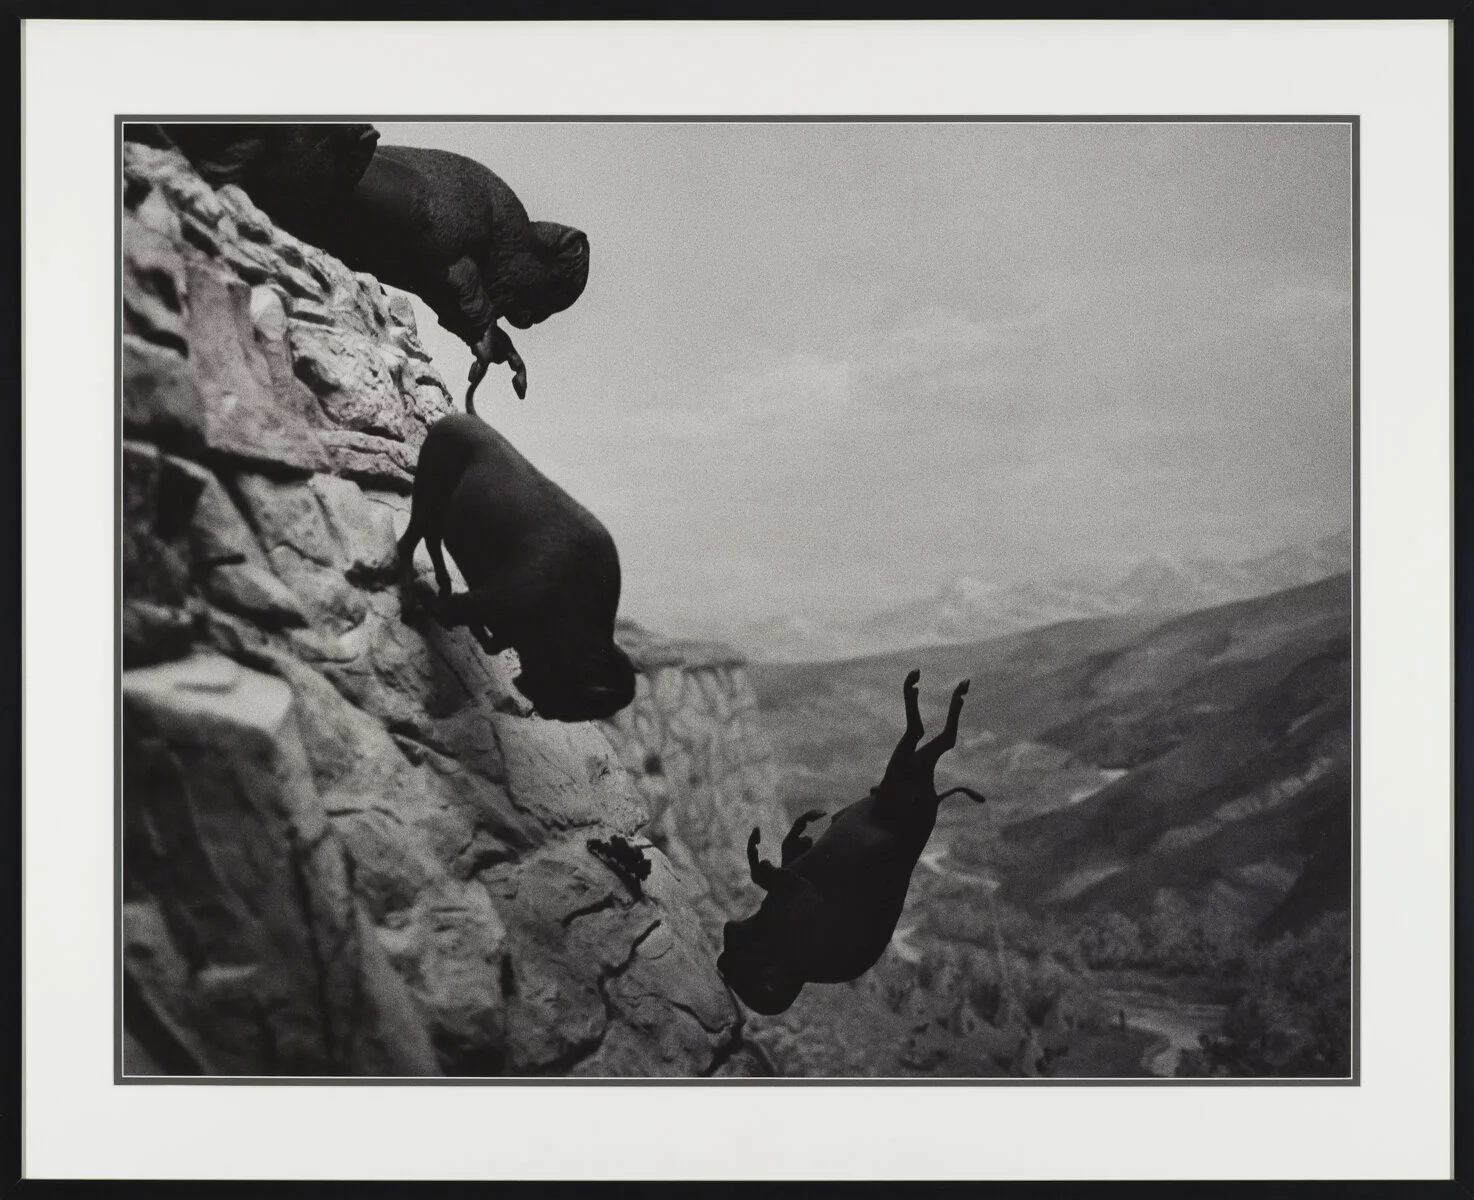 David Wojnarowicz, <i>Untitled (Buffalo)</i>, 1988–89. Collection Museum of Contemporary Art Chicago, Gift of Stephen Solovy Art Foundation, 1992.93. © 1988–89 David Wojnarowicz. Photo: Nathan Keay, © MCA Chicago. 2022/08/1992_93.jpg 